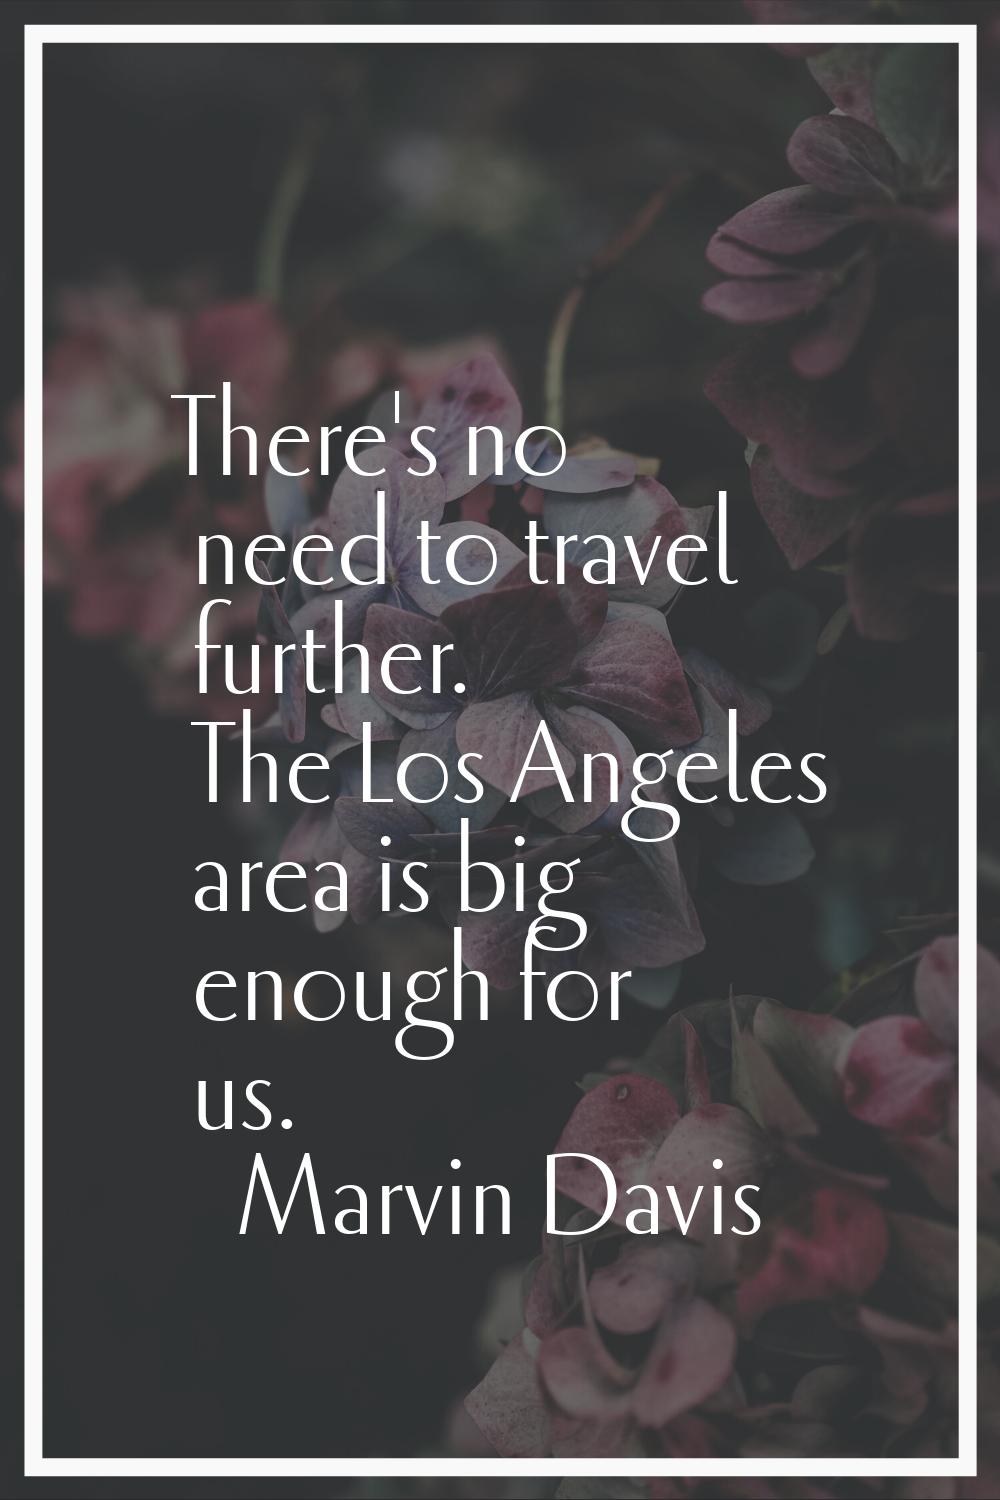 There's no need to travel further. The Los Angeles area is big enough for us.